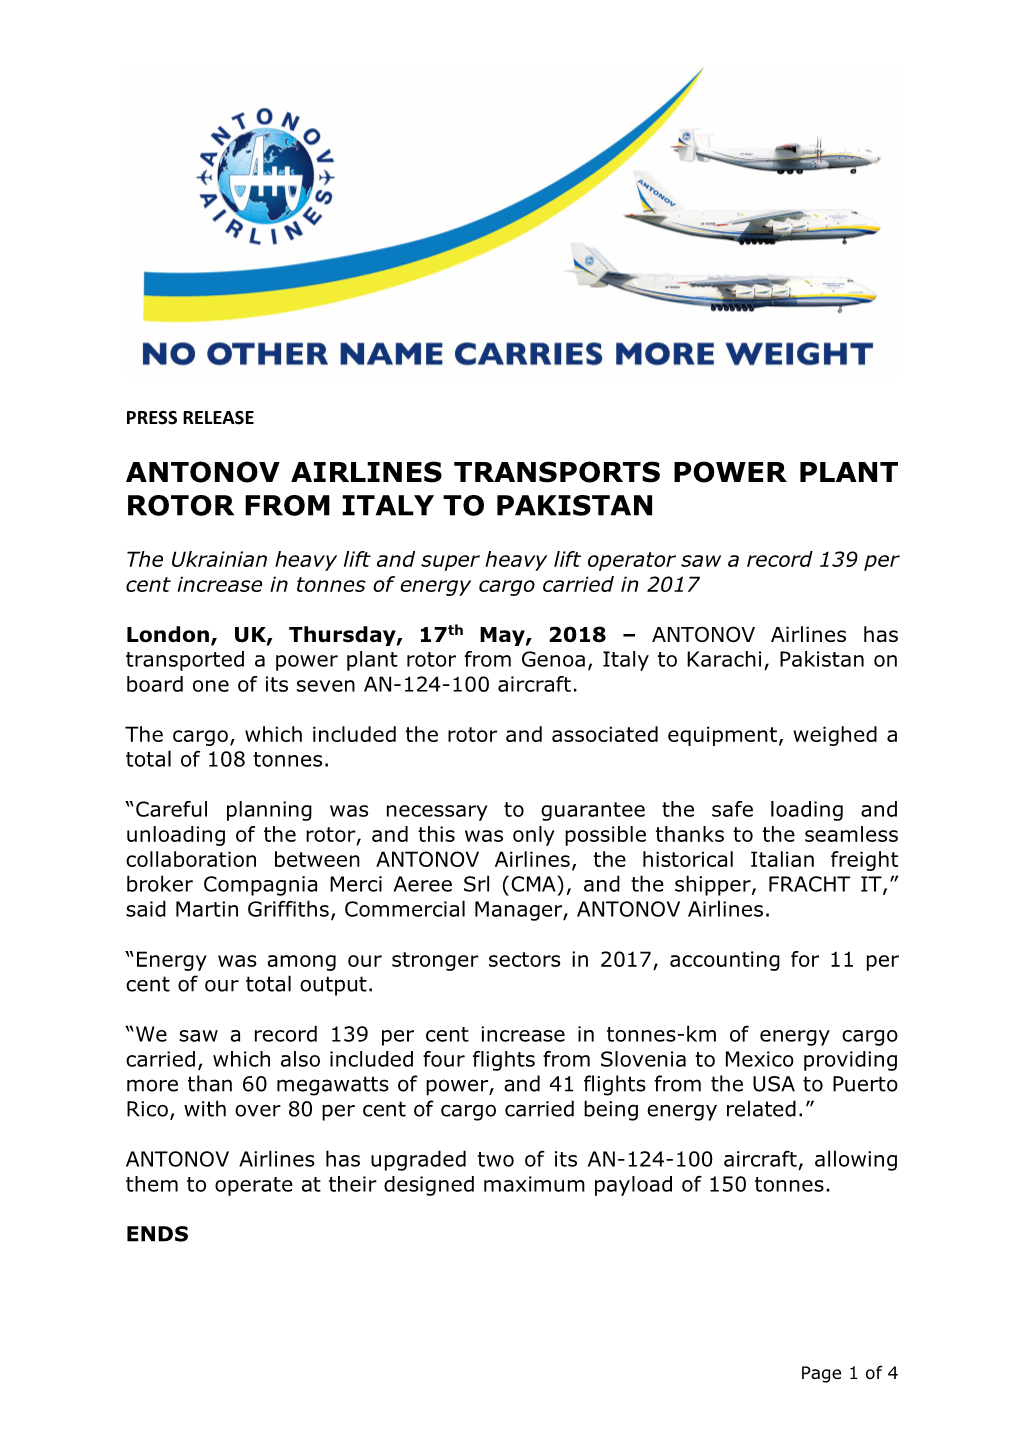 Antonov Airlines Transports Power Plant Rotor from Italy to Pakistan